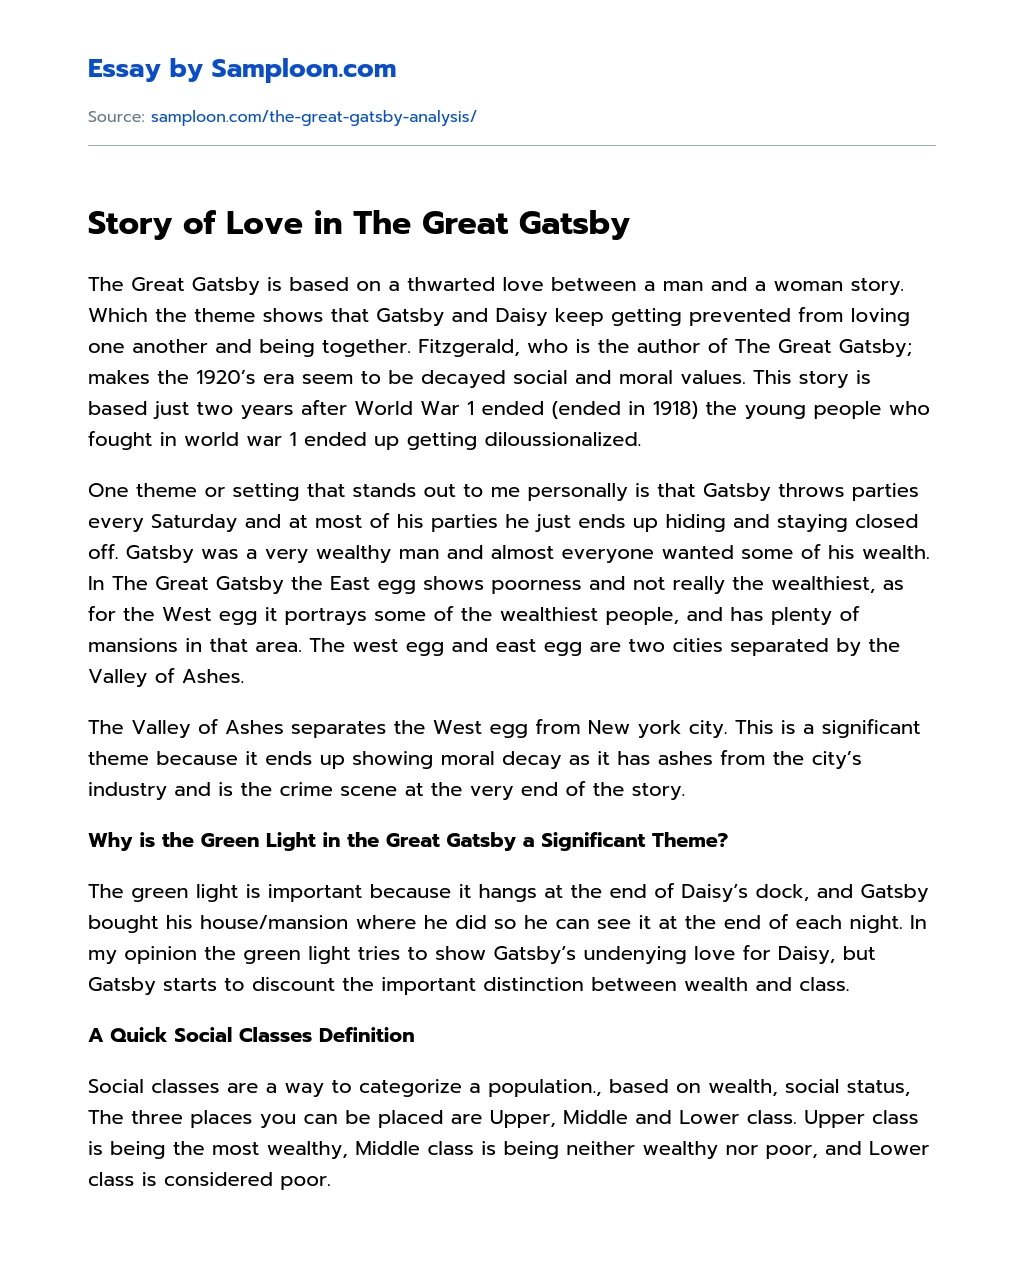 Story of Love in The Great Gatsby essay